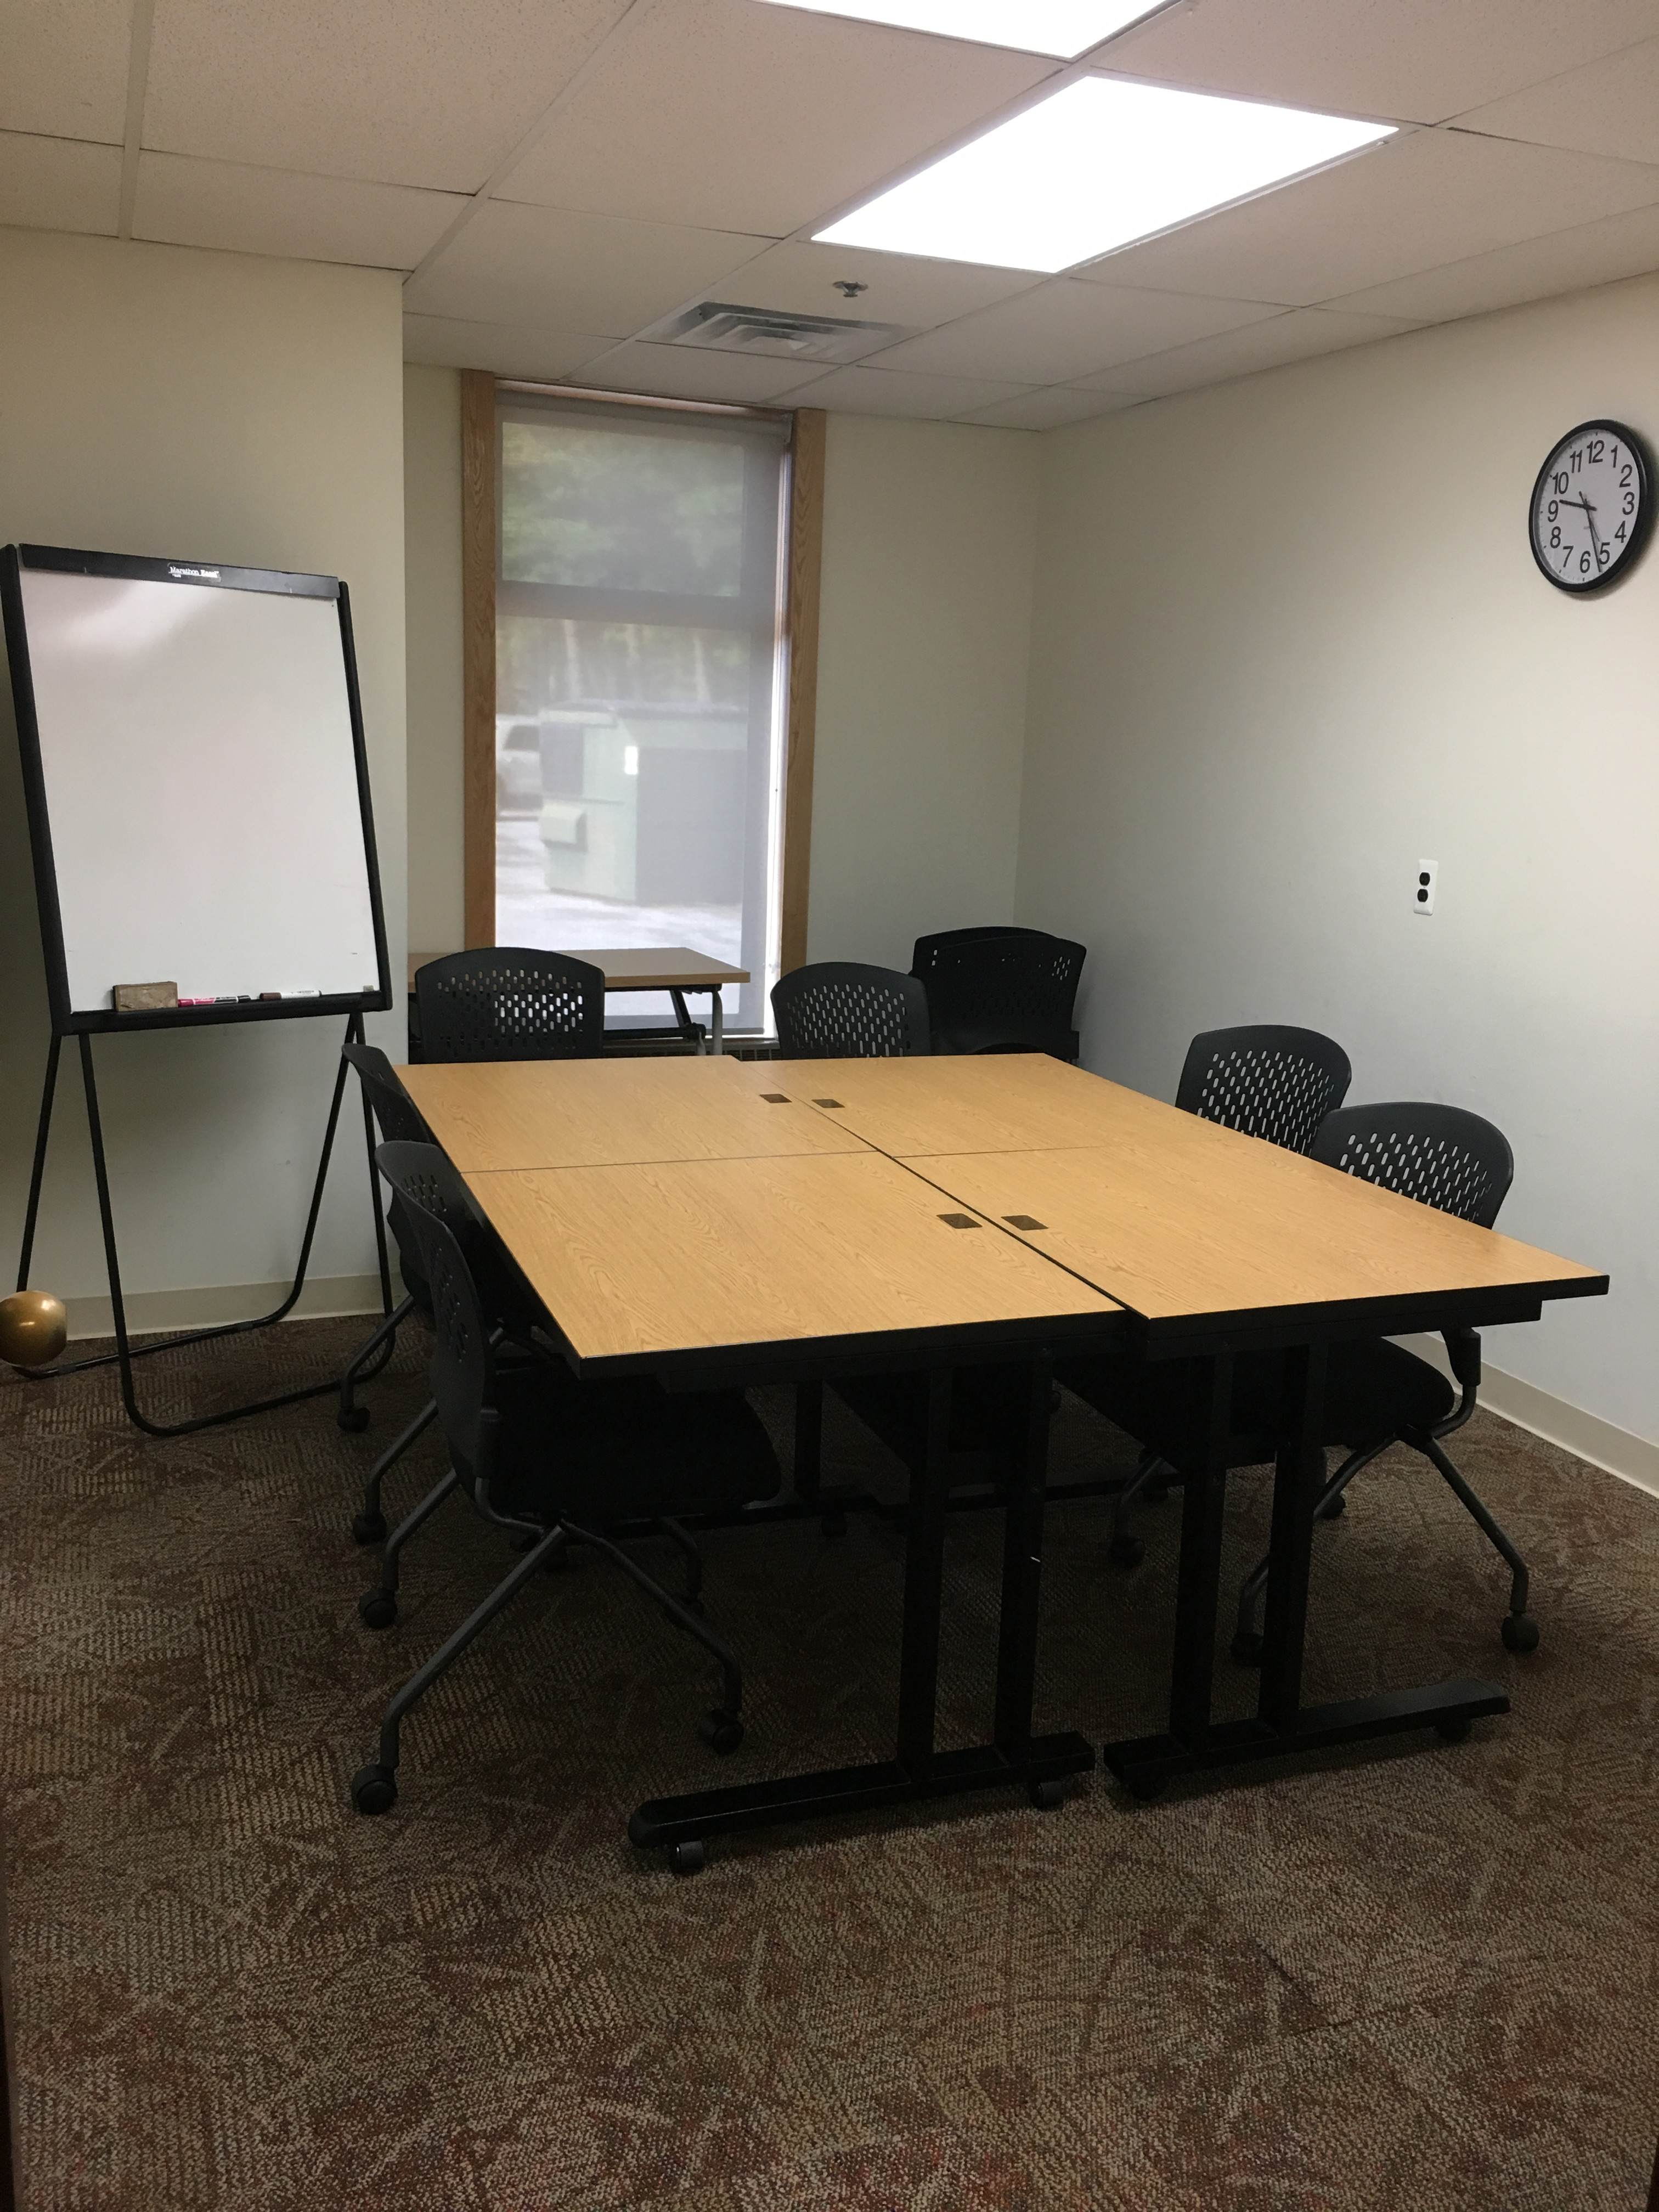 Conference style layout with white board